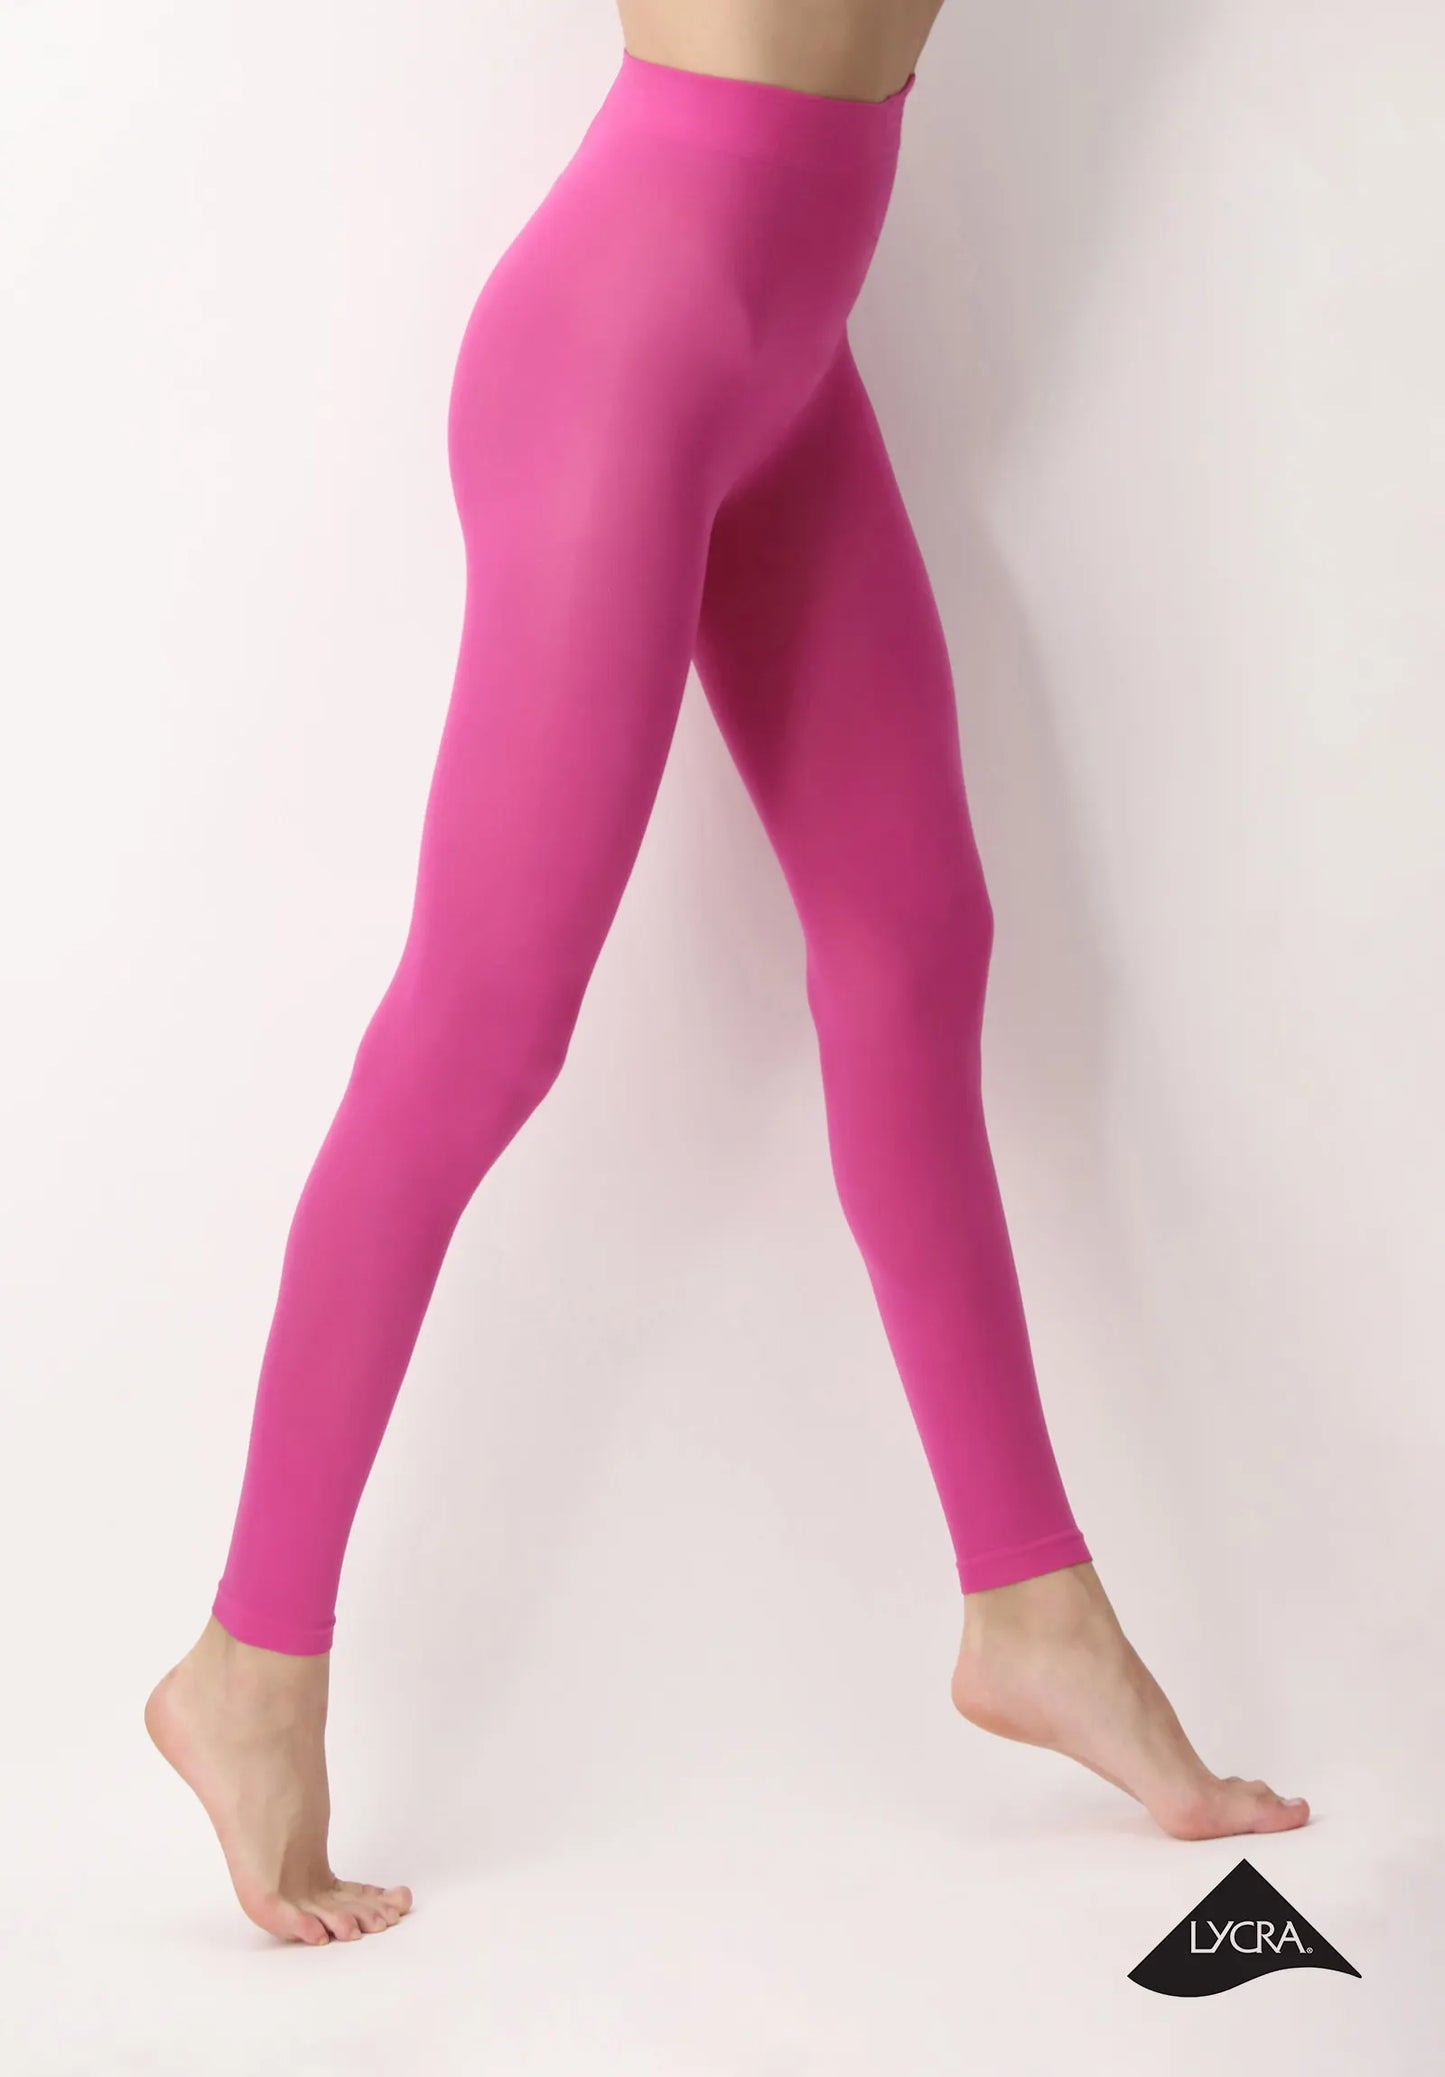 Oroblù All Colors Leggings - Bright pink soft matte opaque footless tights with deep comfort waist band, flat seams and gusset.